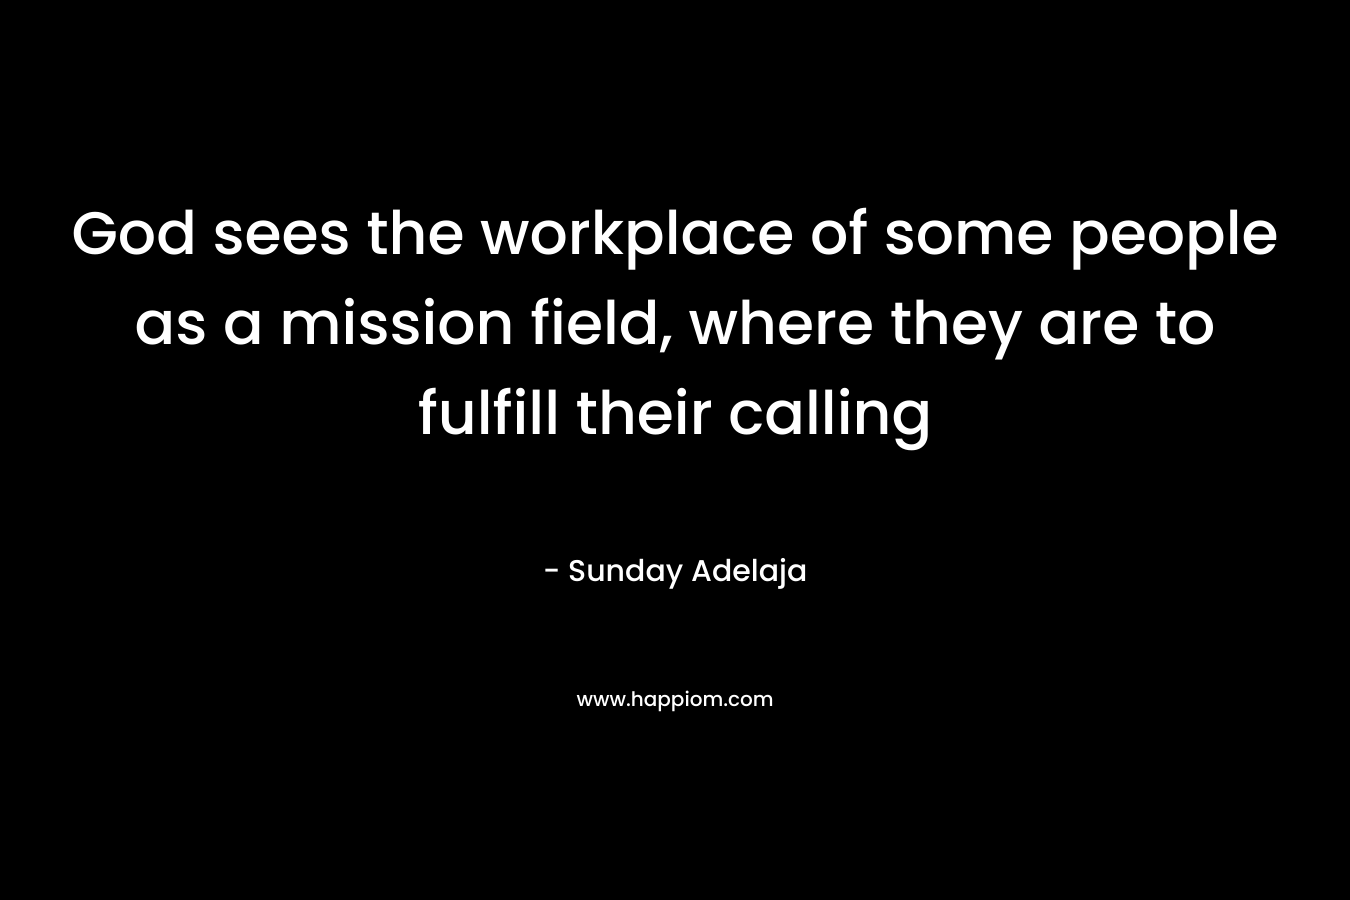 God sees the workplace of some people as a mission field, where they are to fulfill their calling